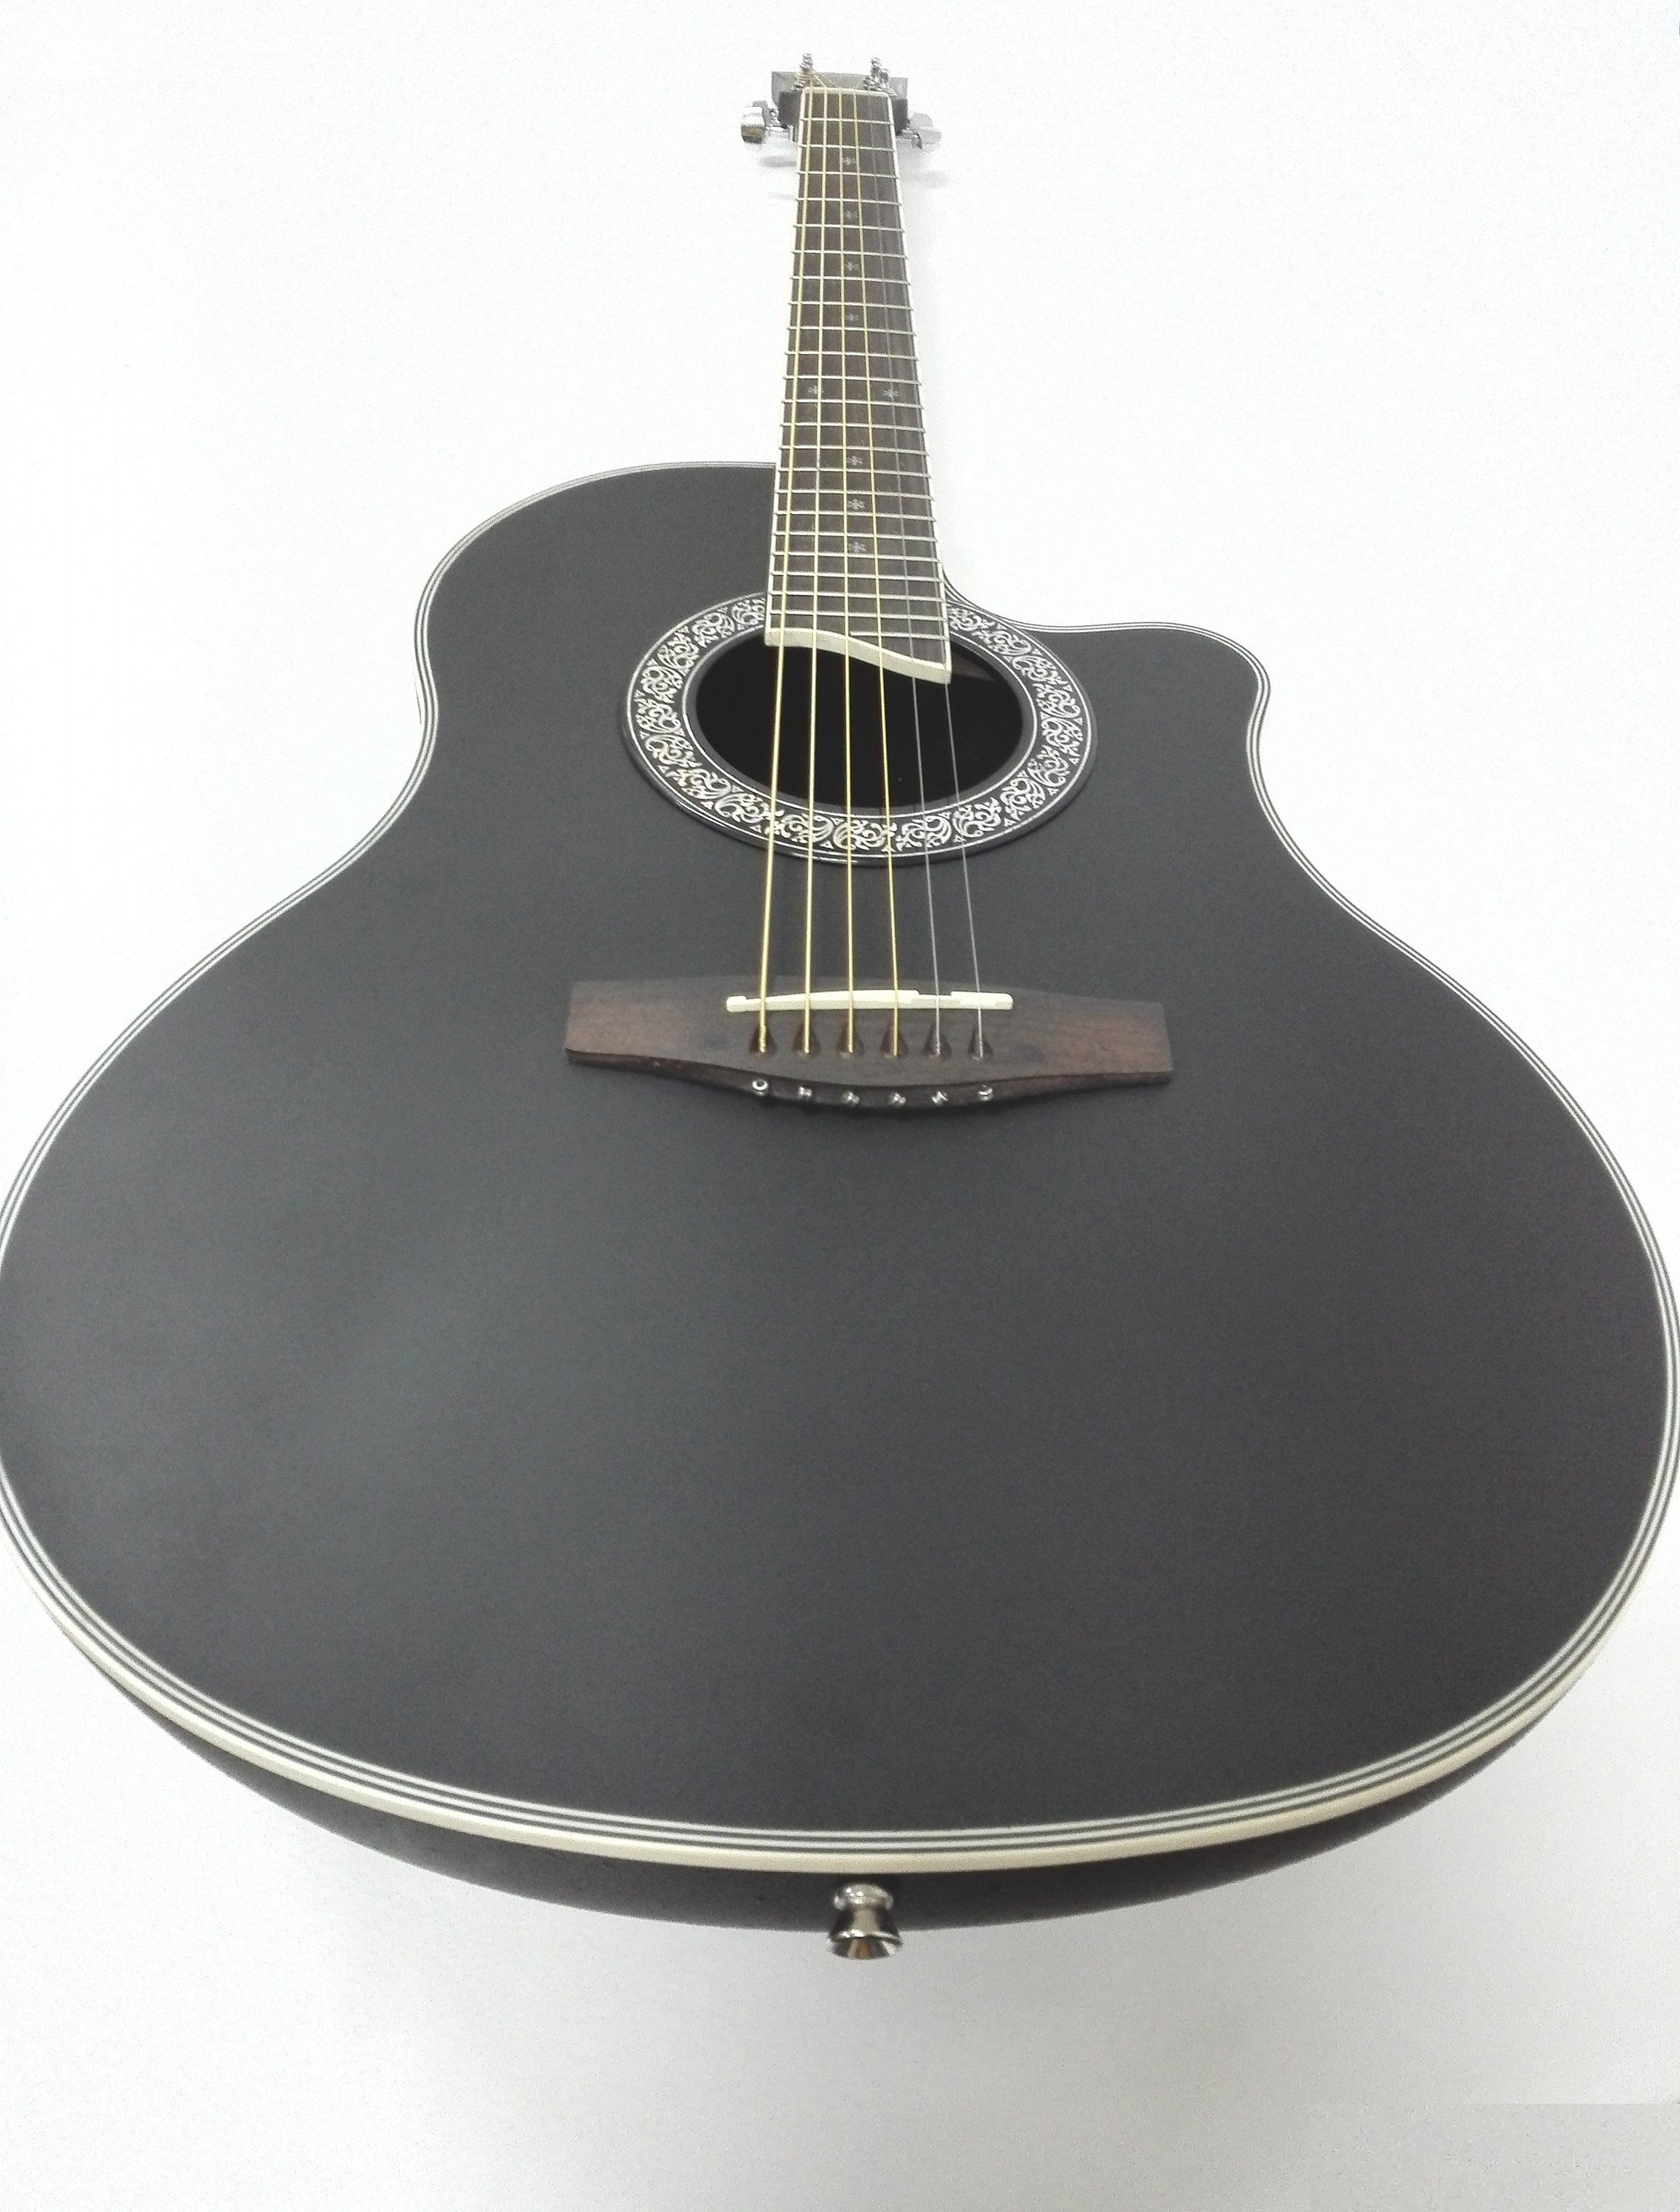 Full Size Caraya Round-back Electro-acoustic Guitar Matt Black 721CEQ/MBK  Swift Delivery With DHL, Your Package in 3-5 Business Days -  Denmark